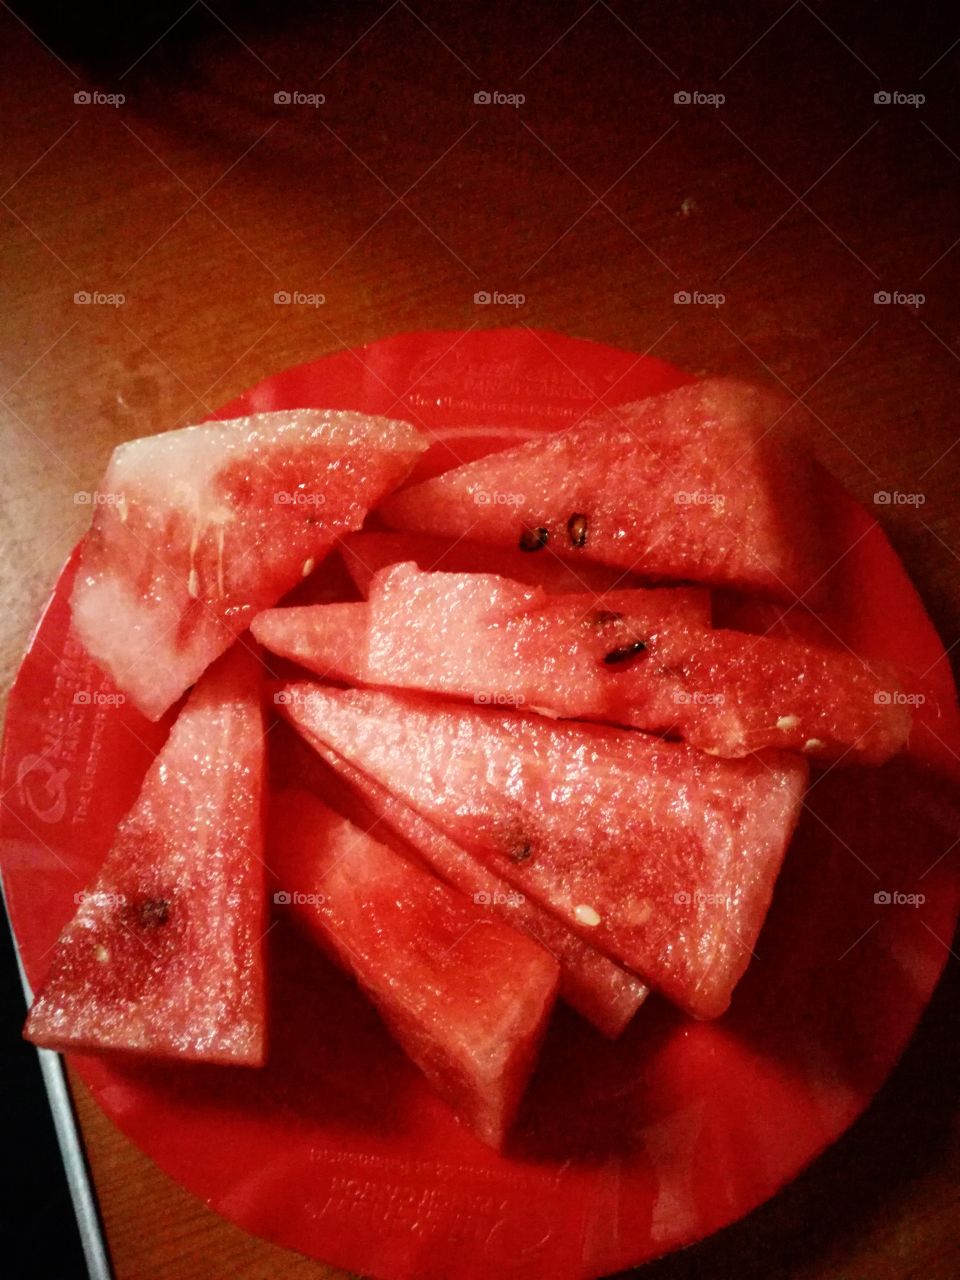 Water melon at it's finest! 😋 Sweet!